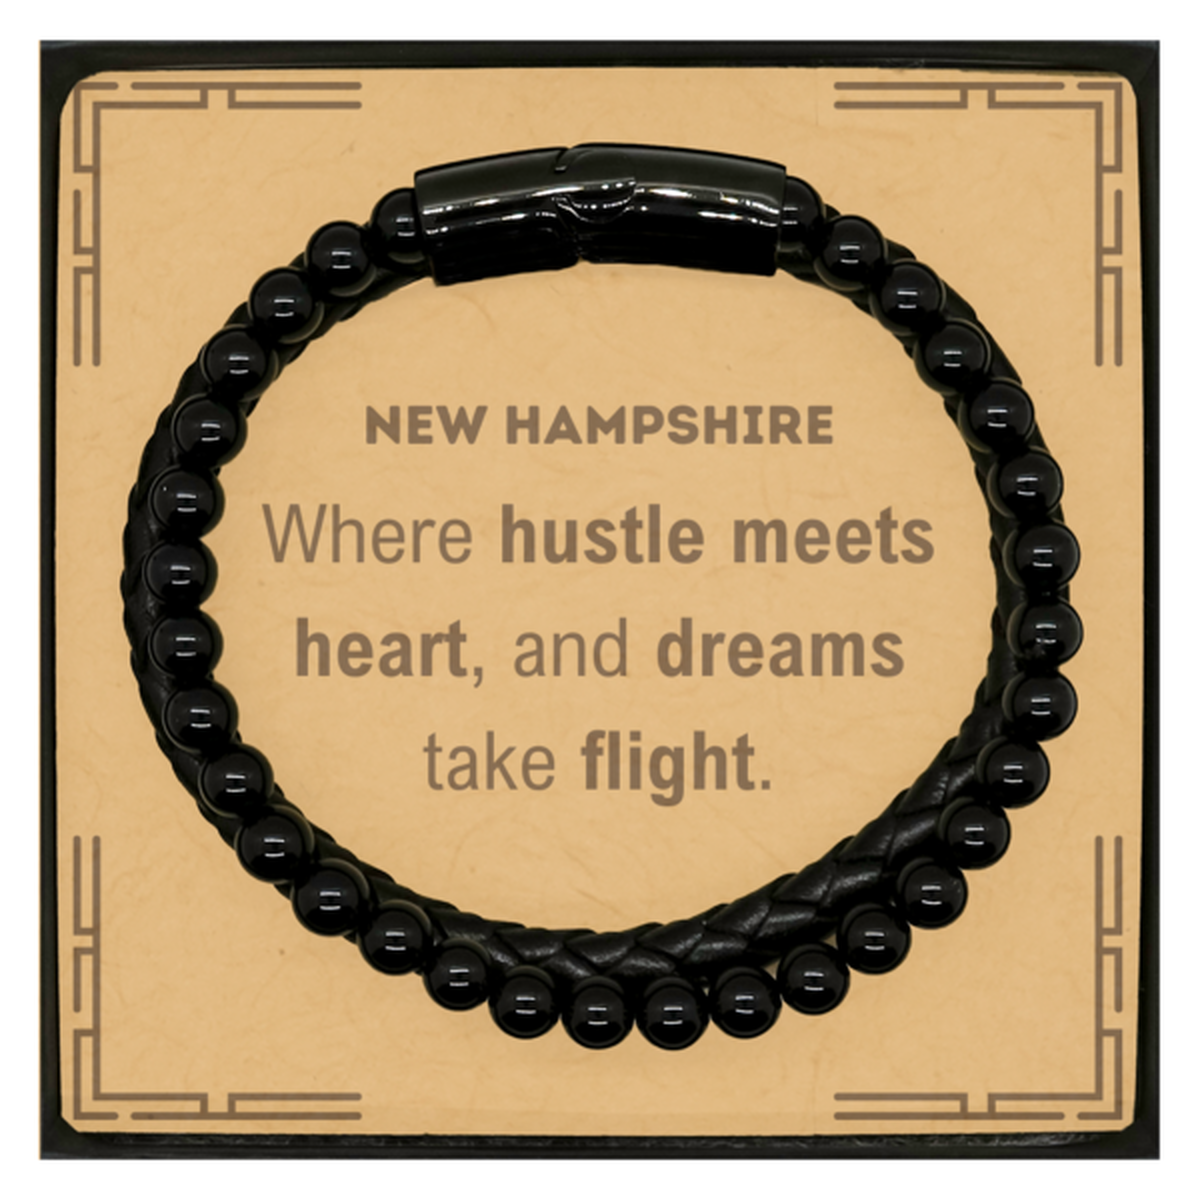 New Hampshire: Where hustle meets heart, and dreams take flight, New Hampshire Card Gifts, Proud New Hampshire Christmas Birthday New Hampshire Stone Leather Bracelets, New Hampshire State People, Men, Women, Friends